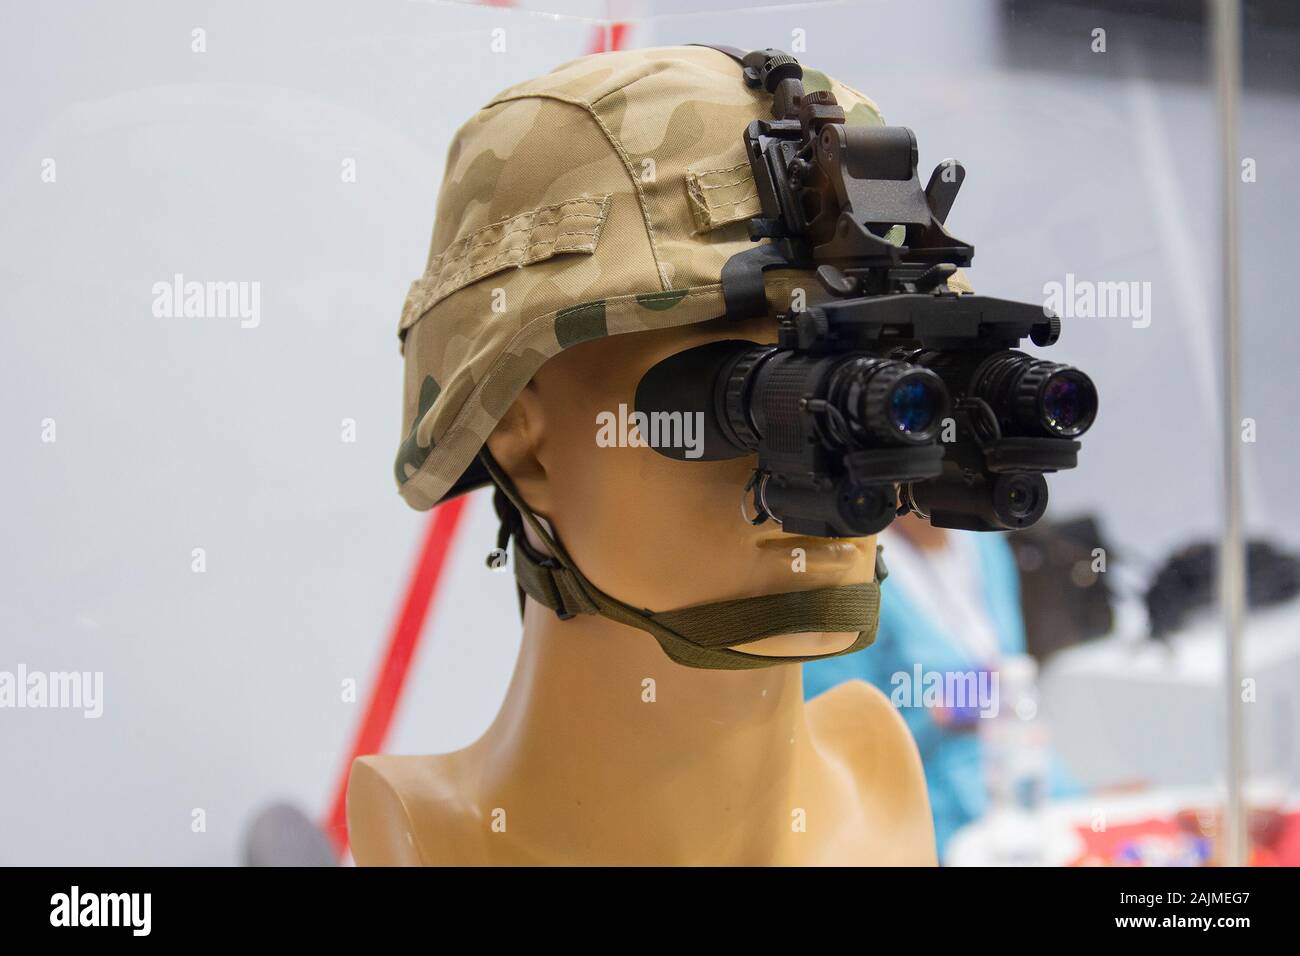 Helmet with night vision device on the demonstration mannequin. Weaponry Stock Photo